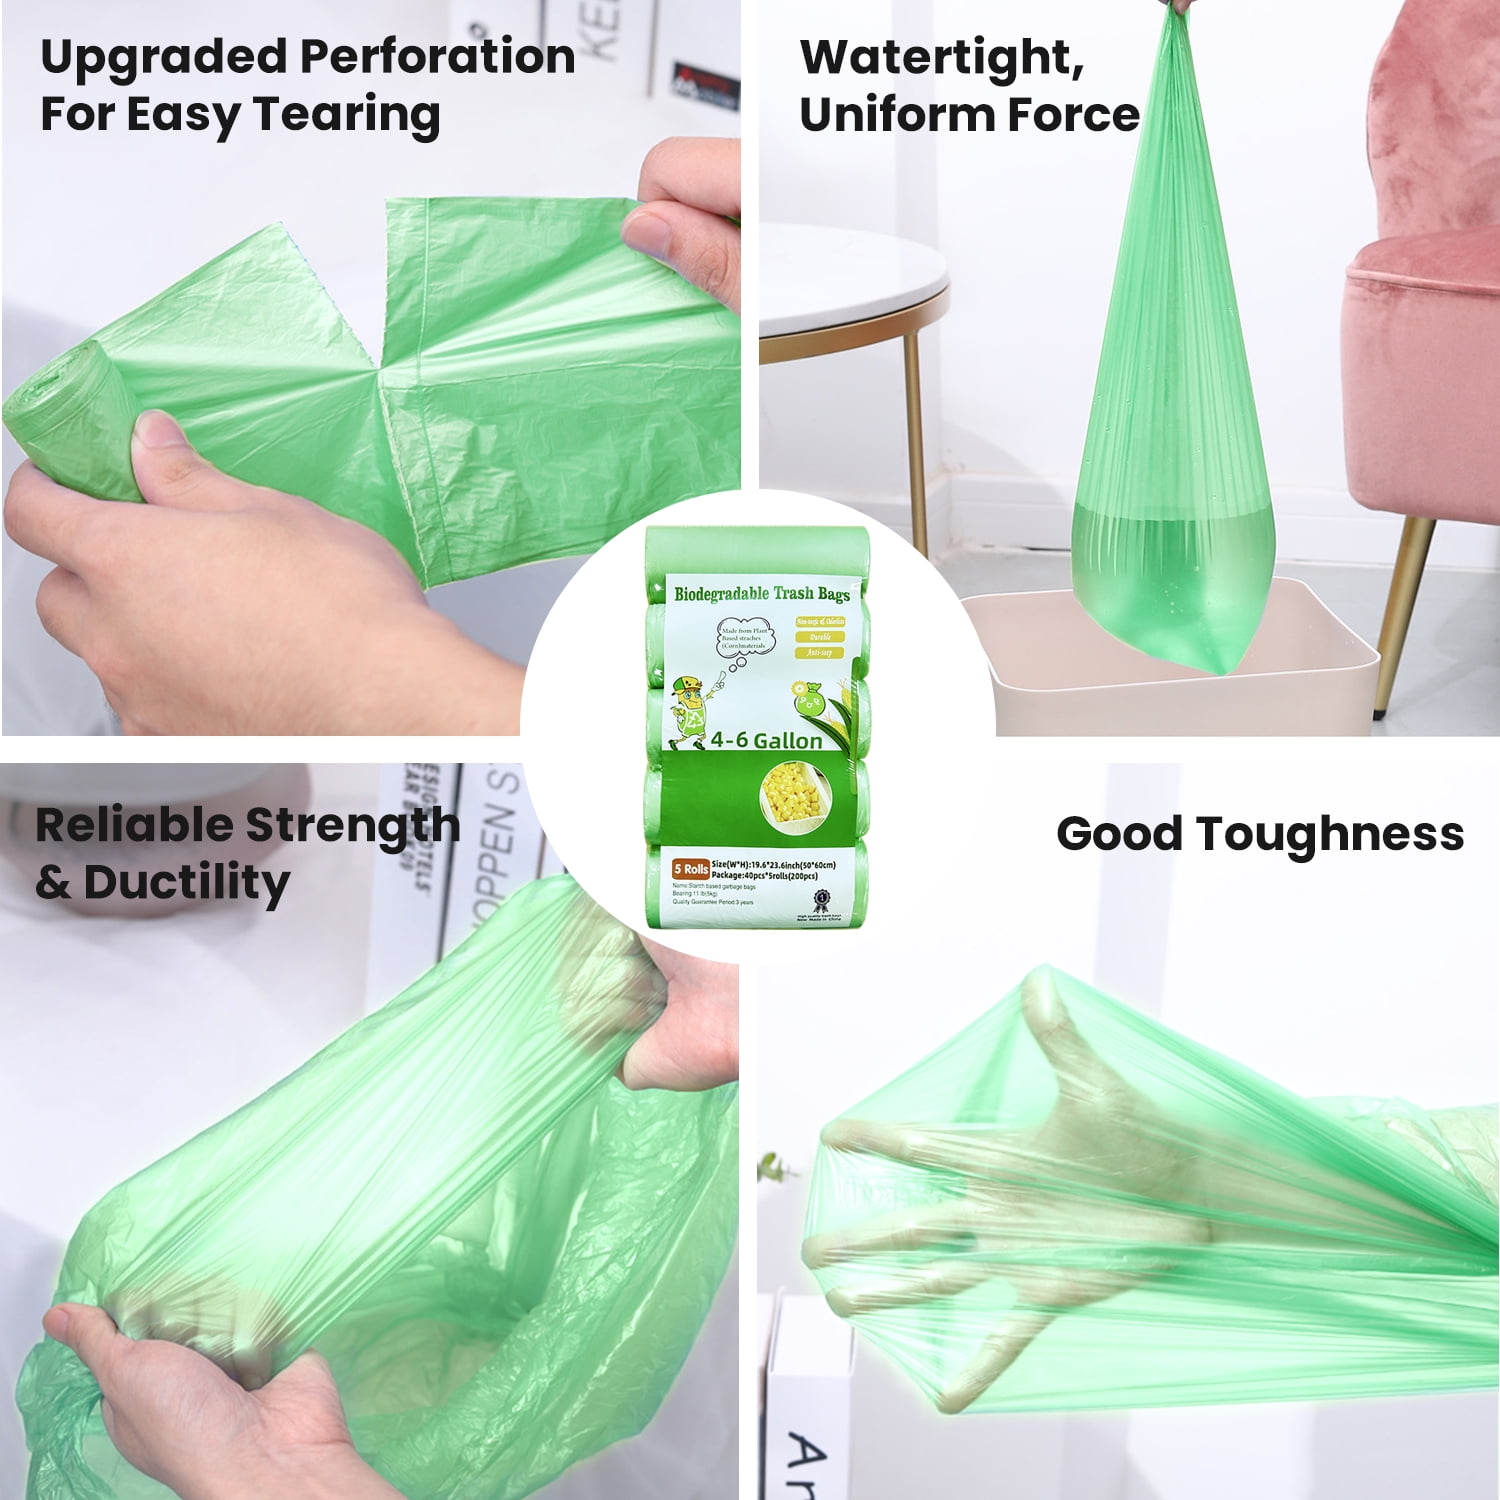 Homelove 6 Gallon Trash Bags,100 Counts, Unscented Thick Garbage Bags  Wastebasket Bin Liners Plastic Trash Bags for Home Waste Bin,Bathroom  Bedroom